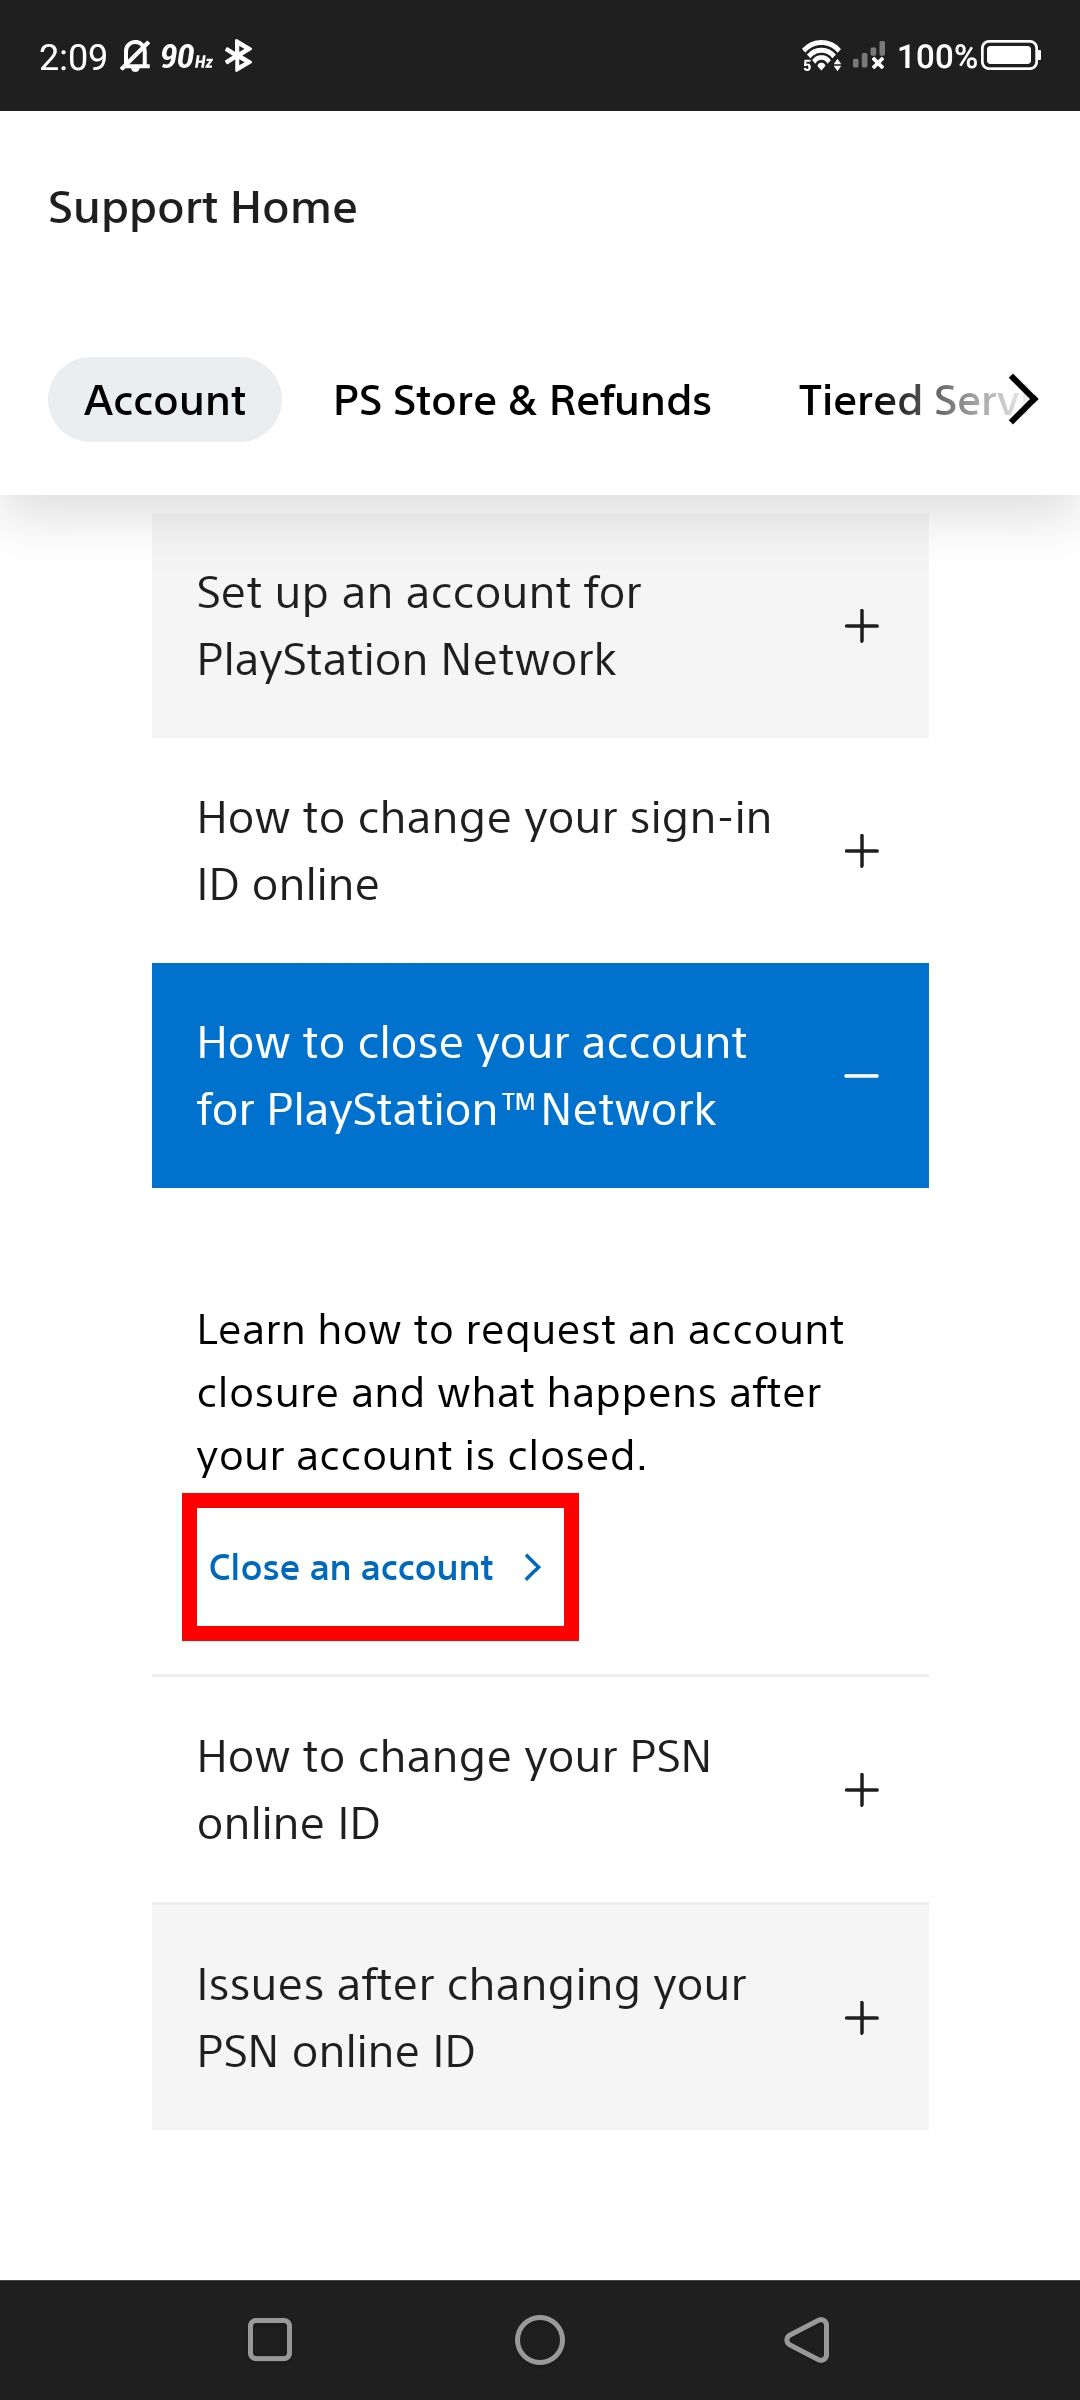 Red rectangle outline over Close an account on the PlayStation Support page